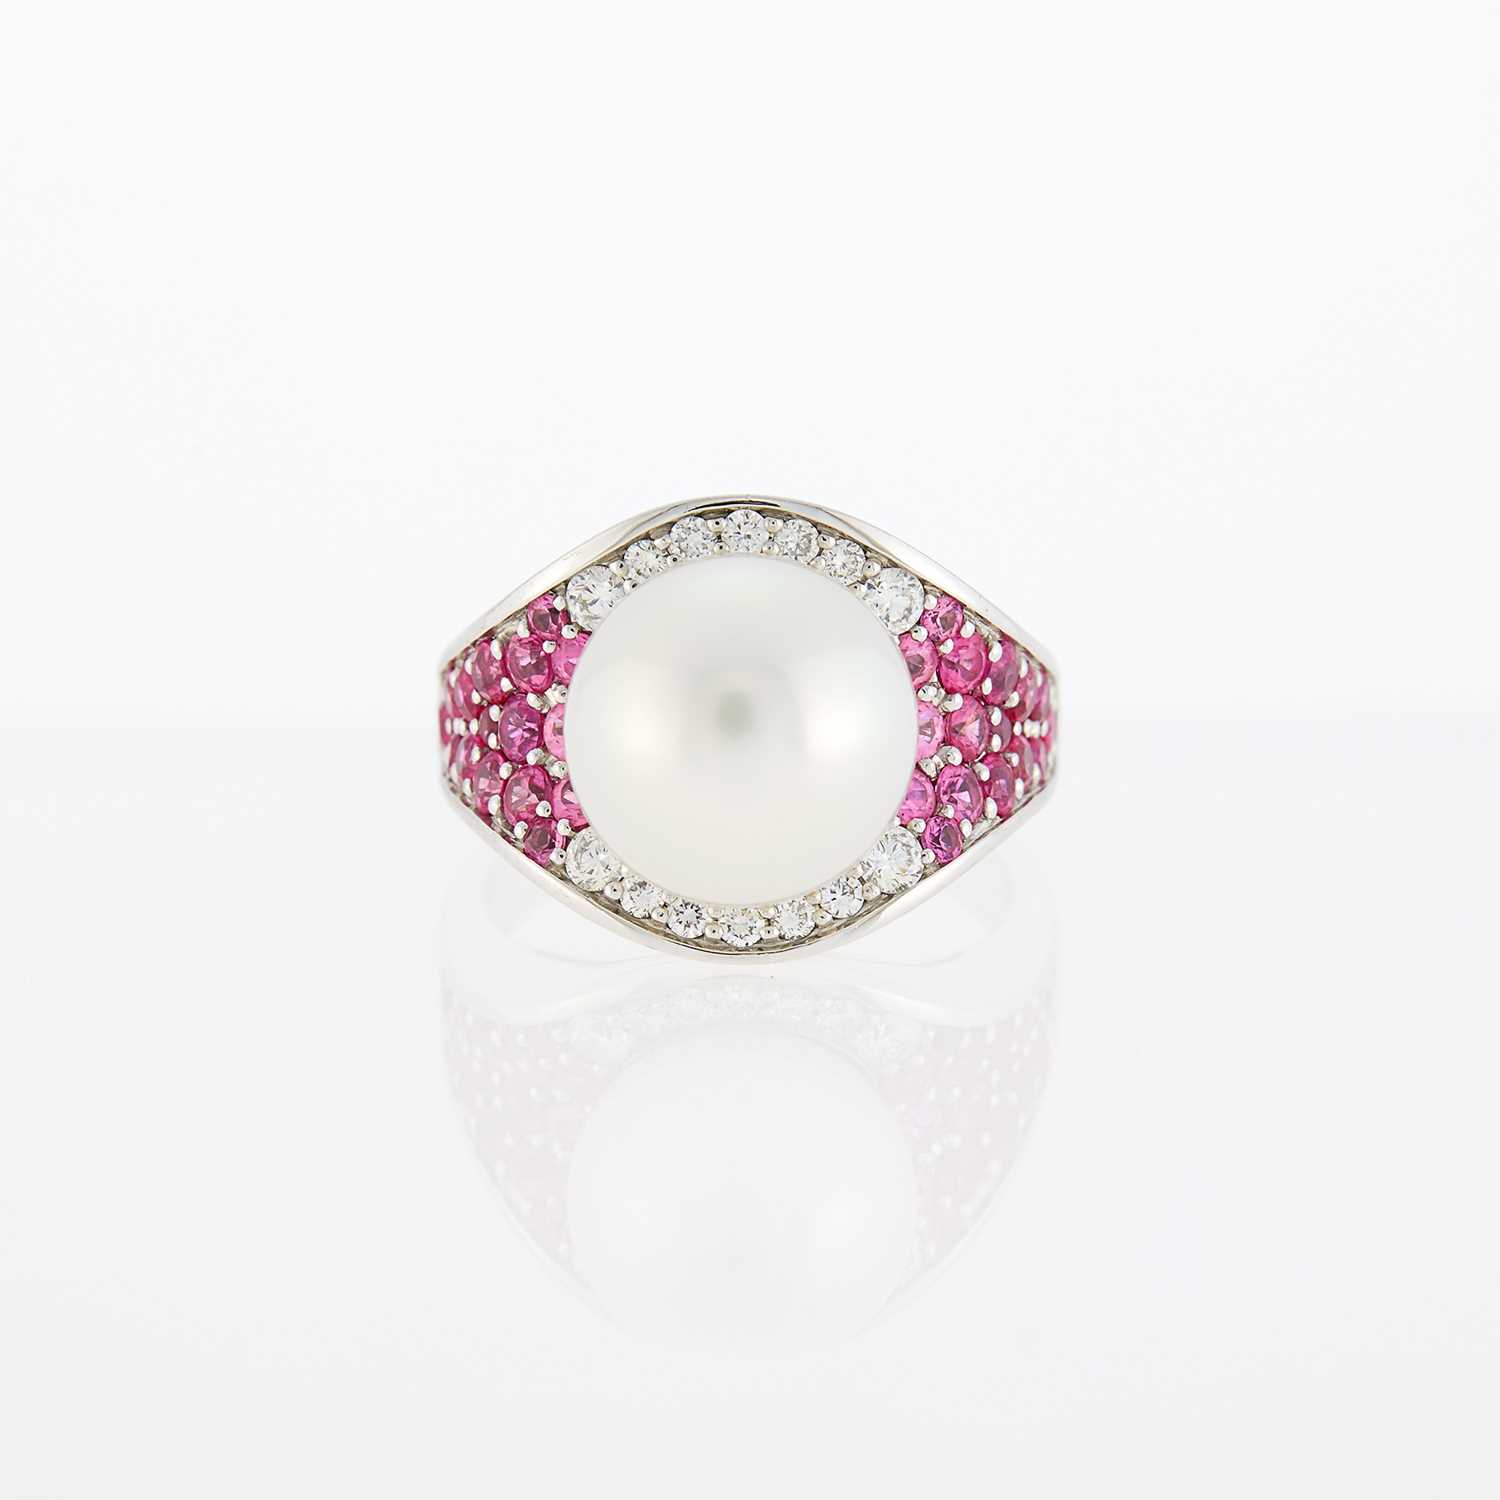 Lot 1092 - White Gold, Cultured Pearl, Pink Sapphire and Diamond Ring